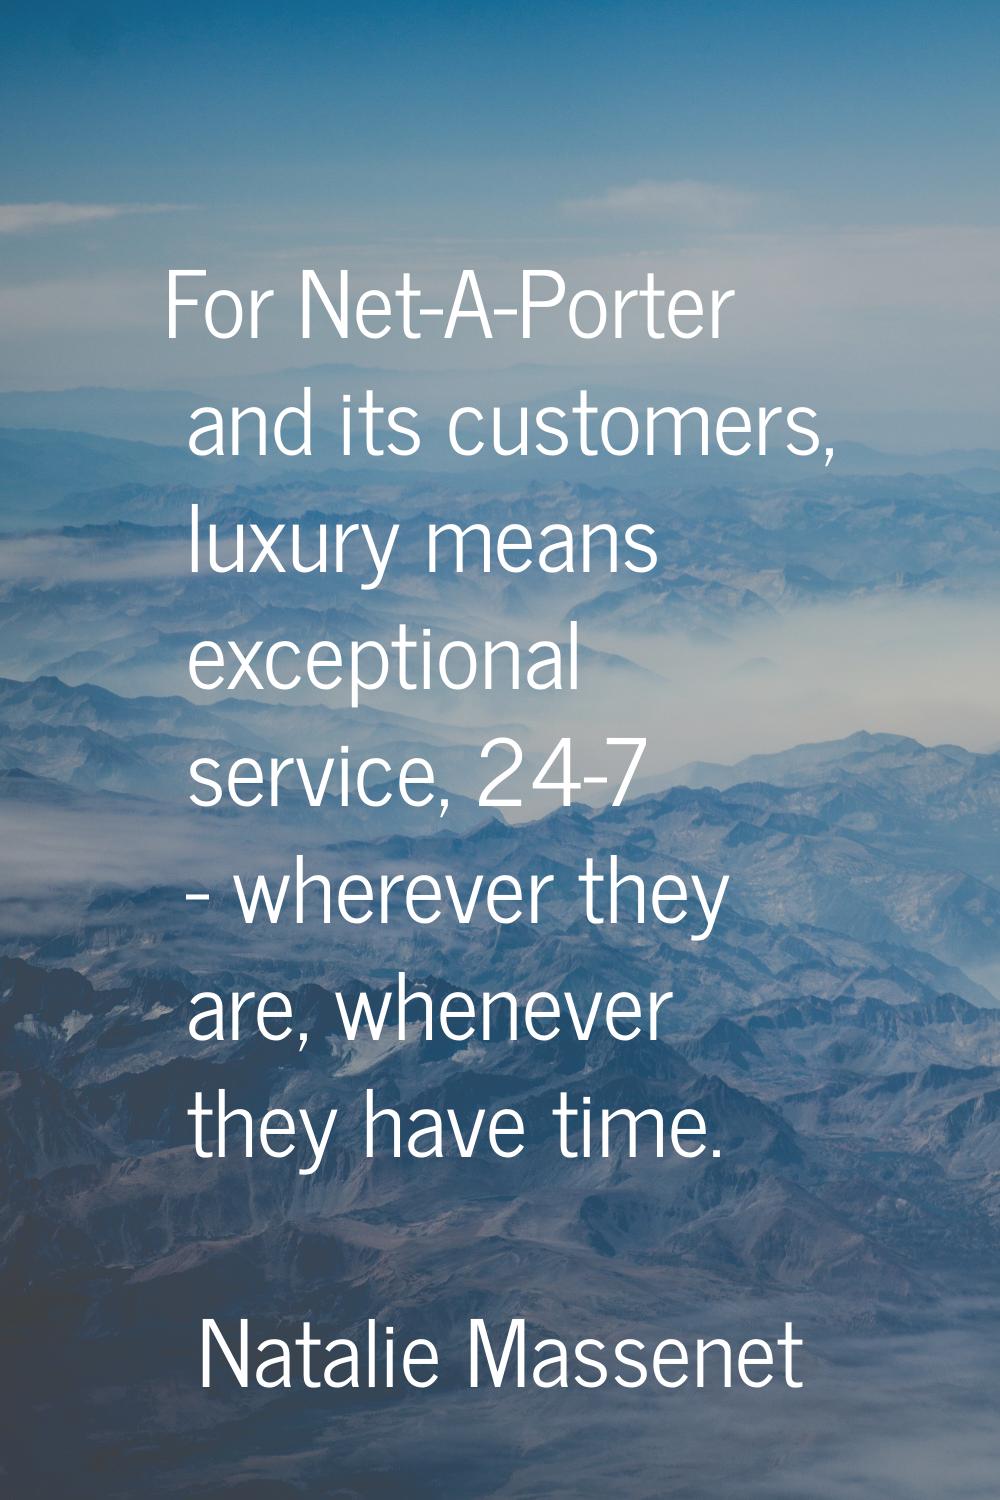 For Net-A-Porter and its customers, luxury means exceptional service, 24-7 - wherever they are, whe